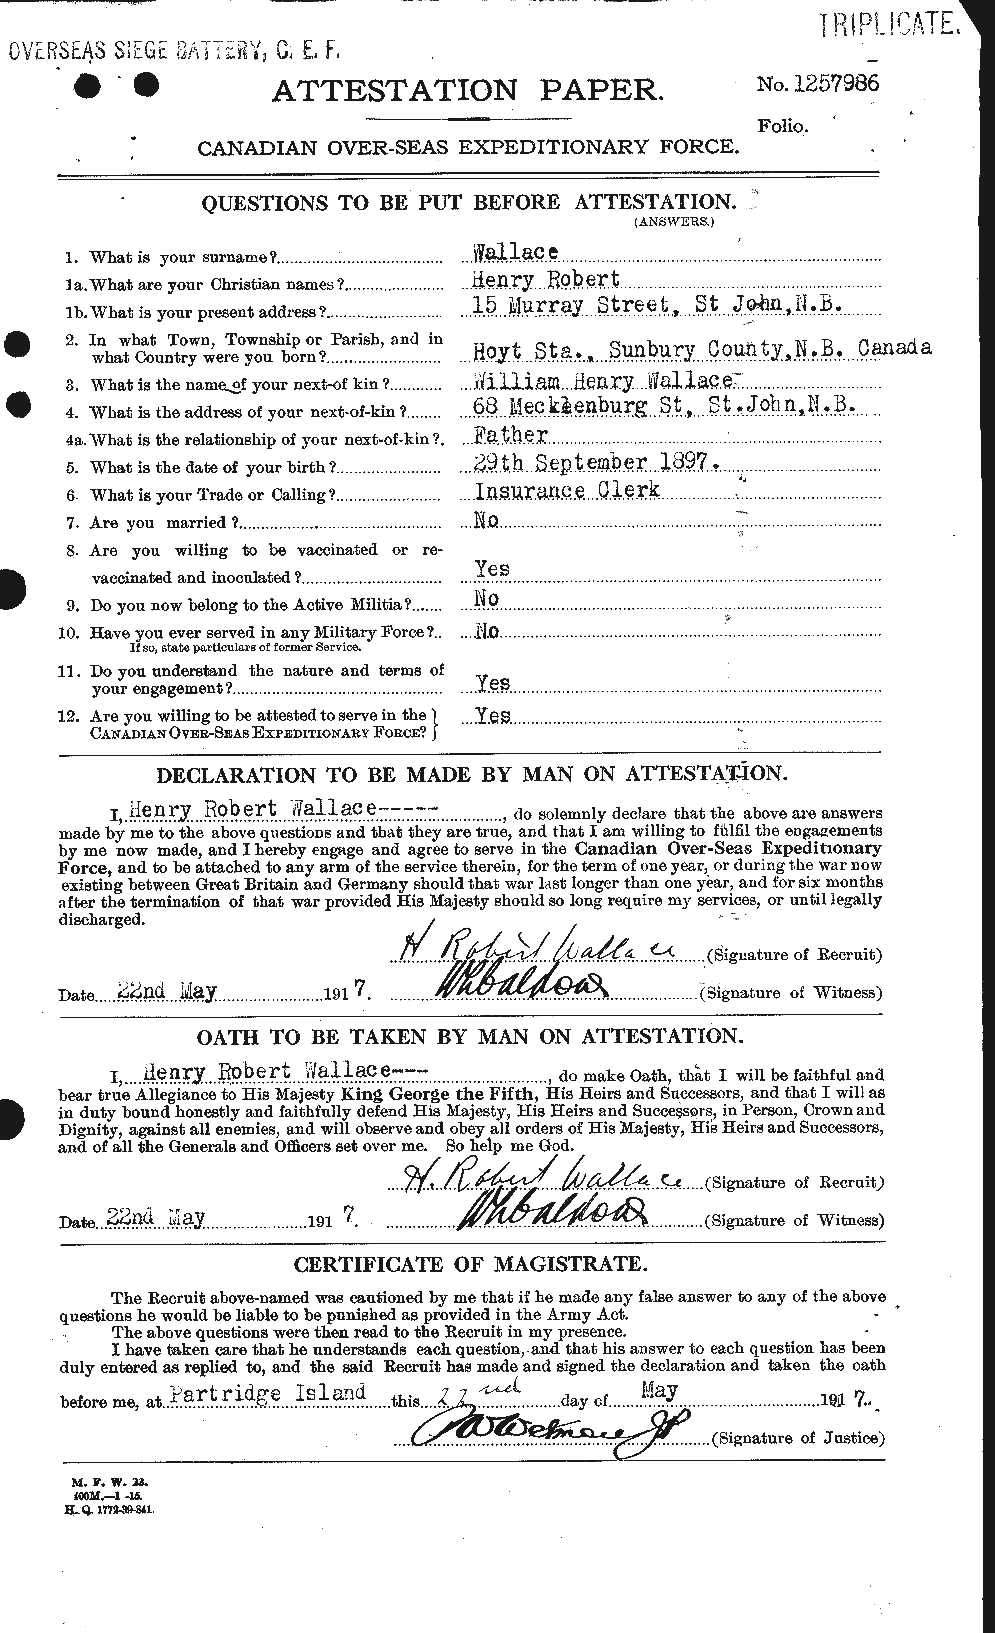 Personnel Records of the First World War - CEF 654503a